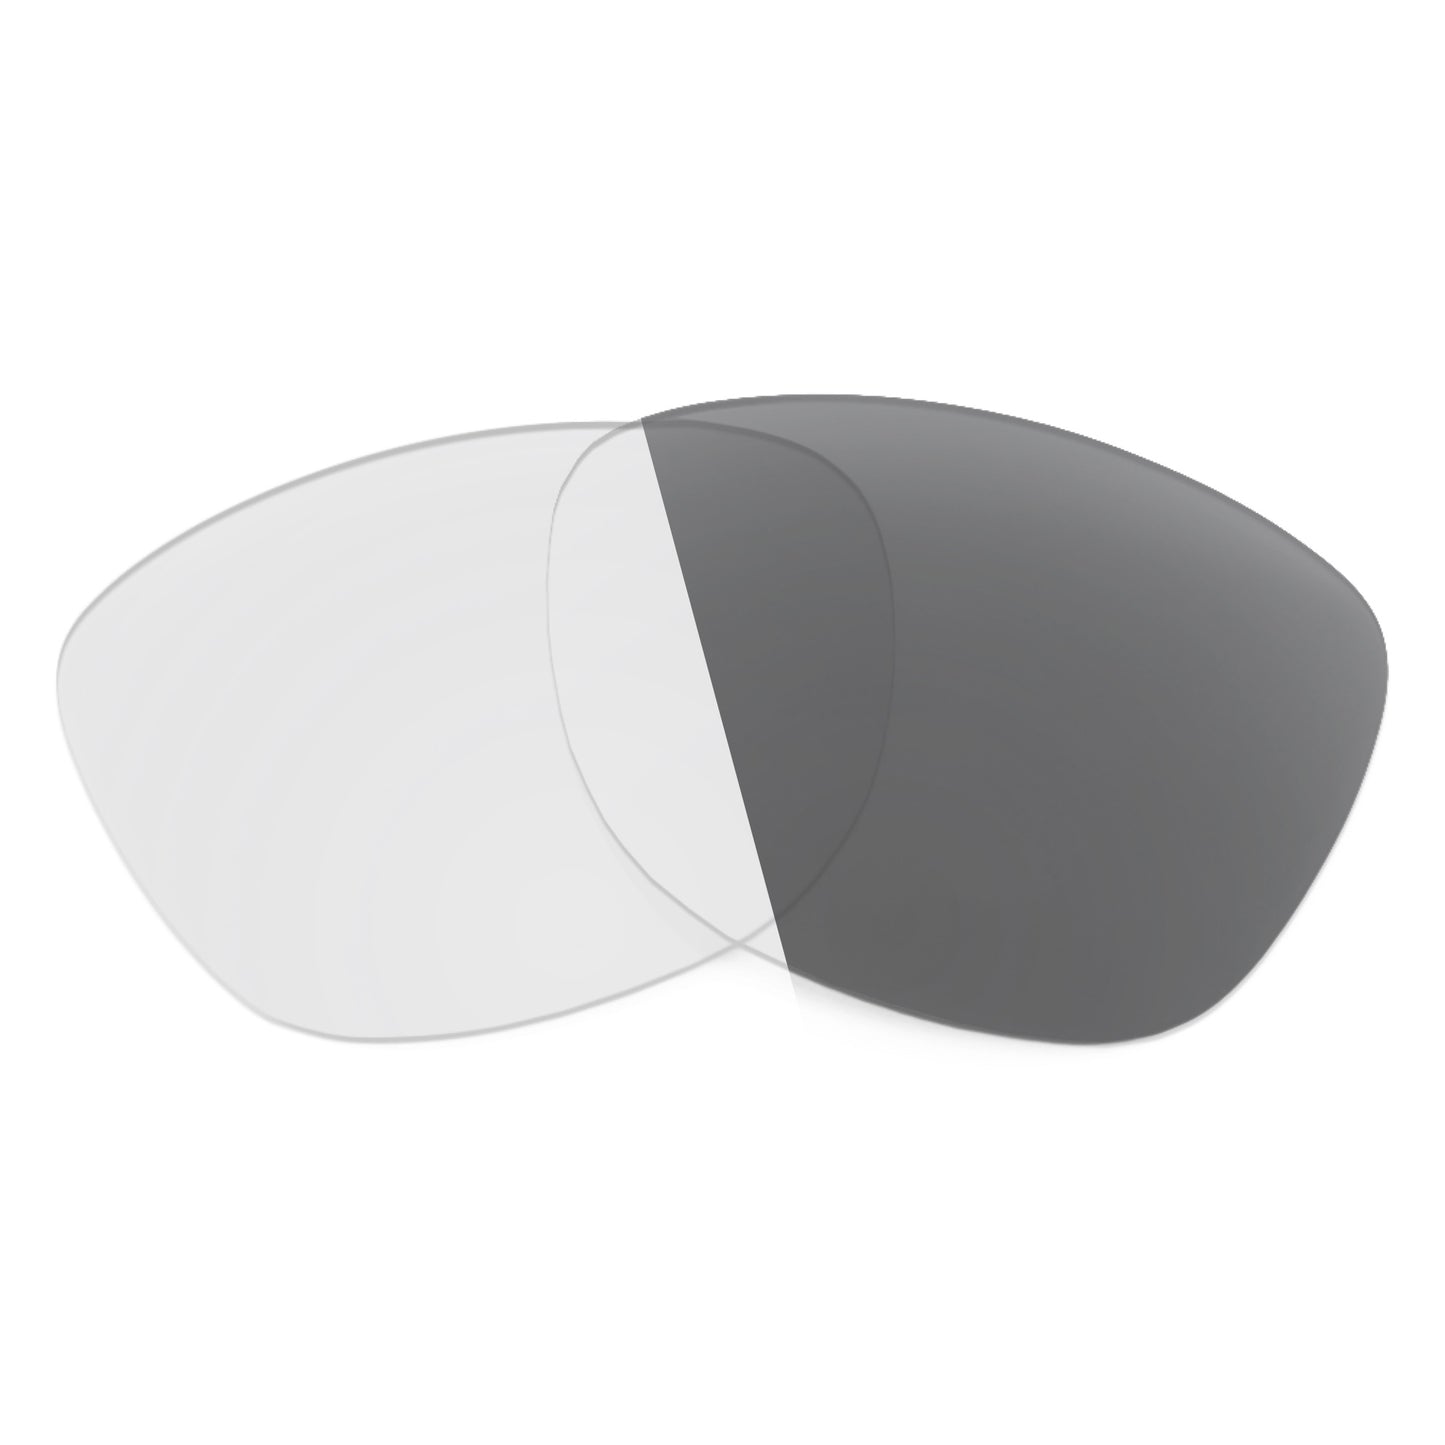 Revant replacement lenses for Ray-Ban RB4387 56mm Non-Polarized Adapt Gray Photochromic